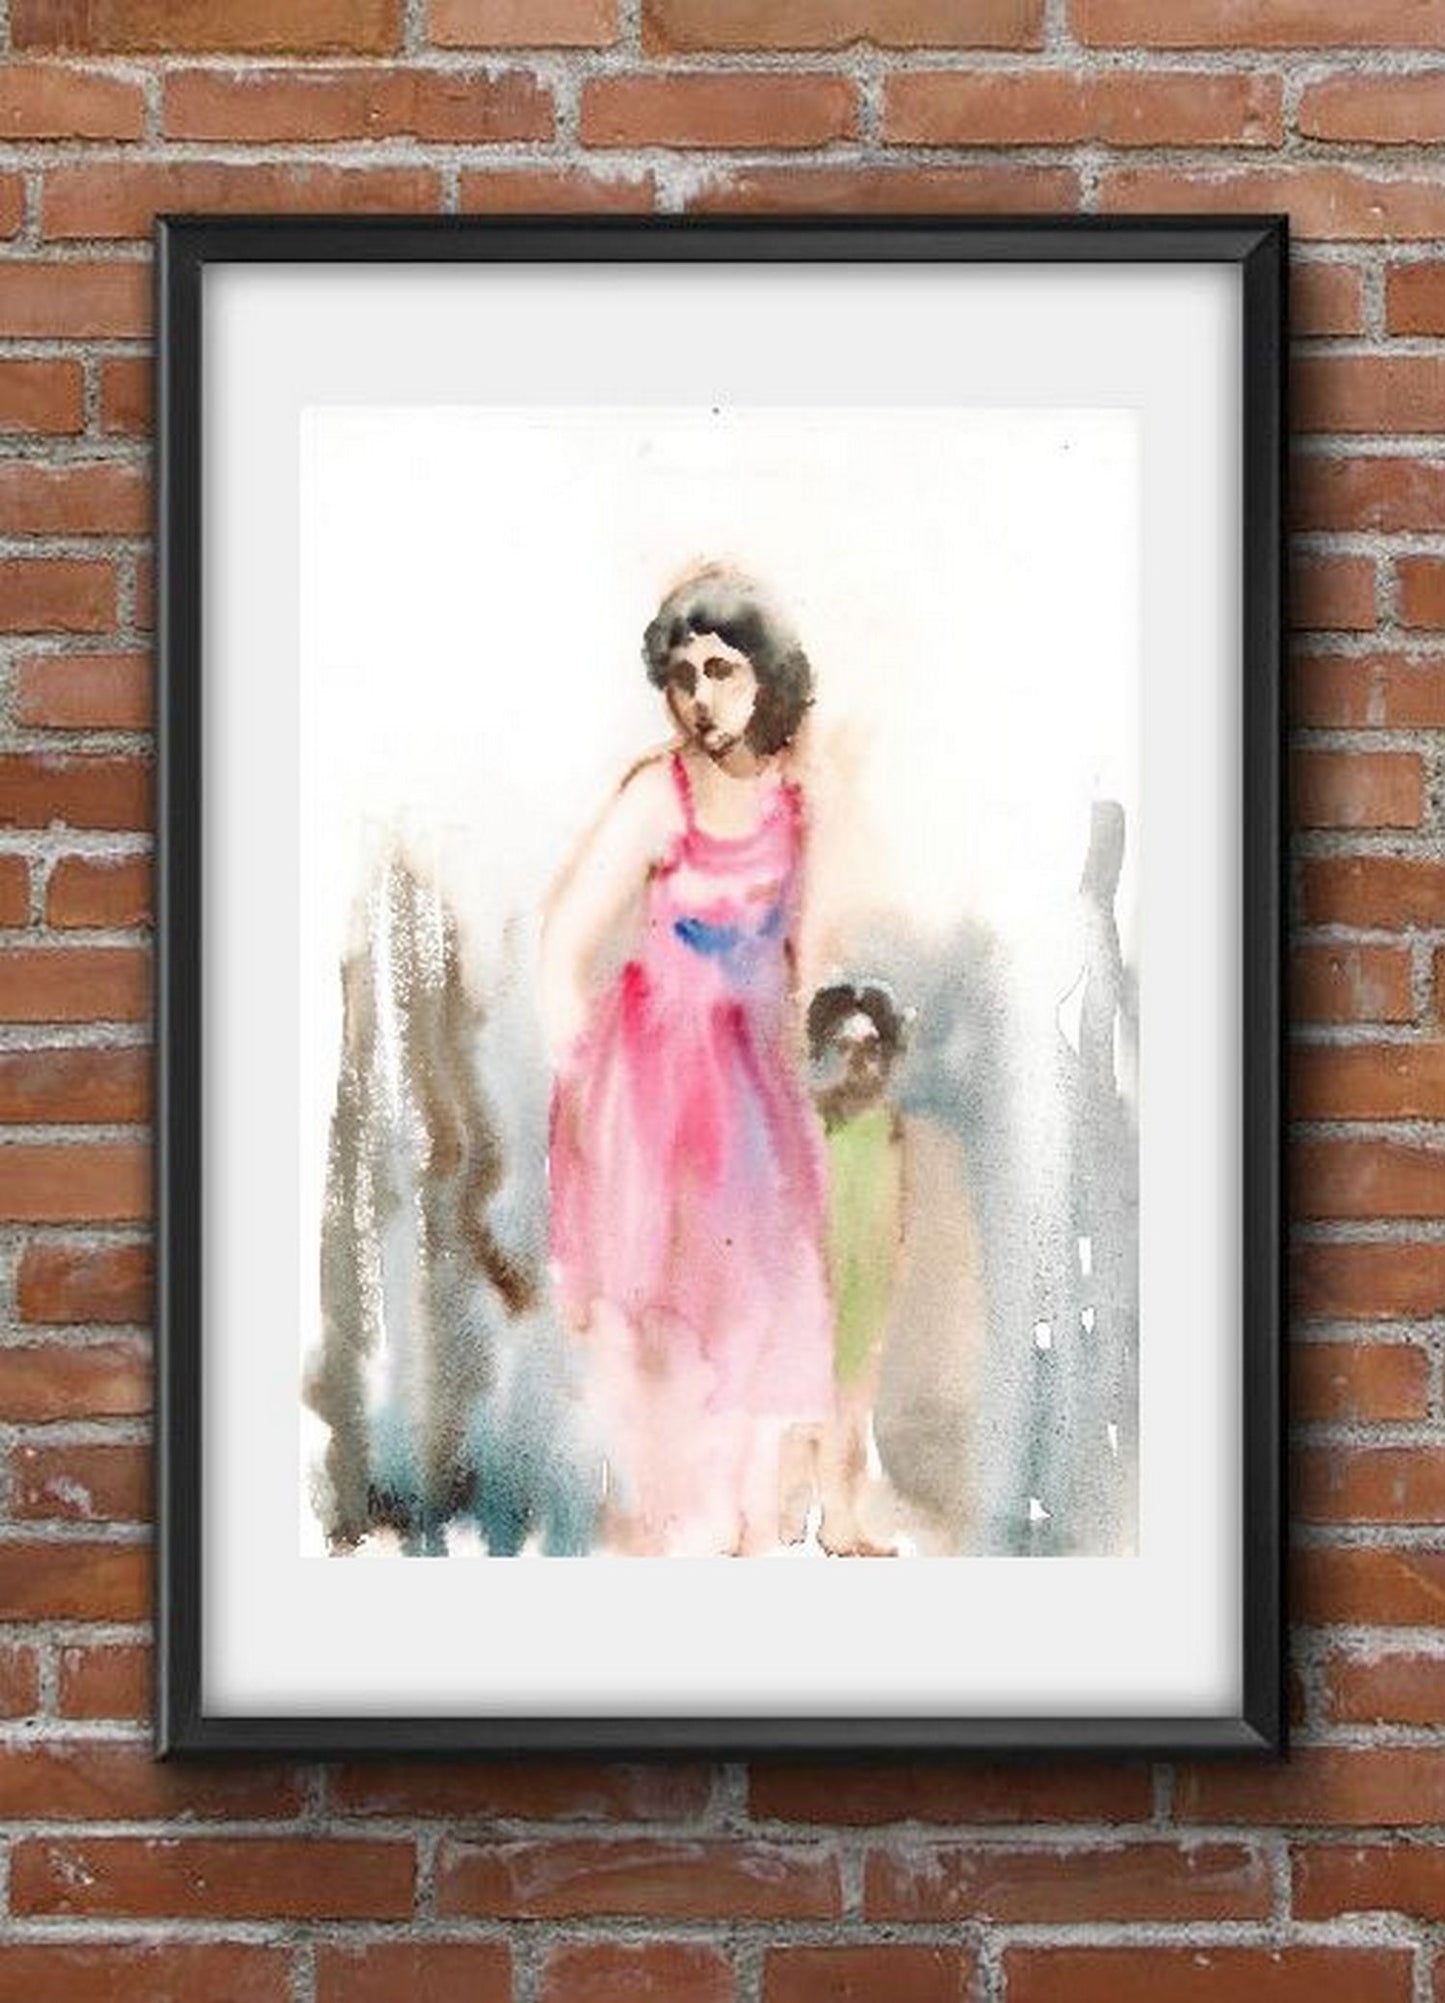 Virtual wall view, Mother & child, Watercolor painting